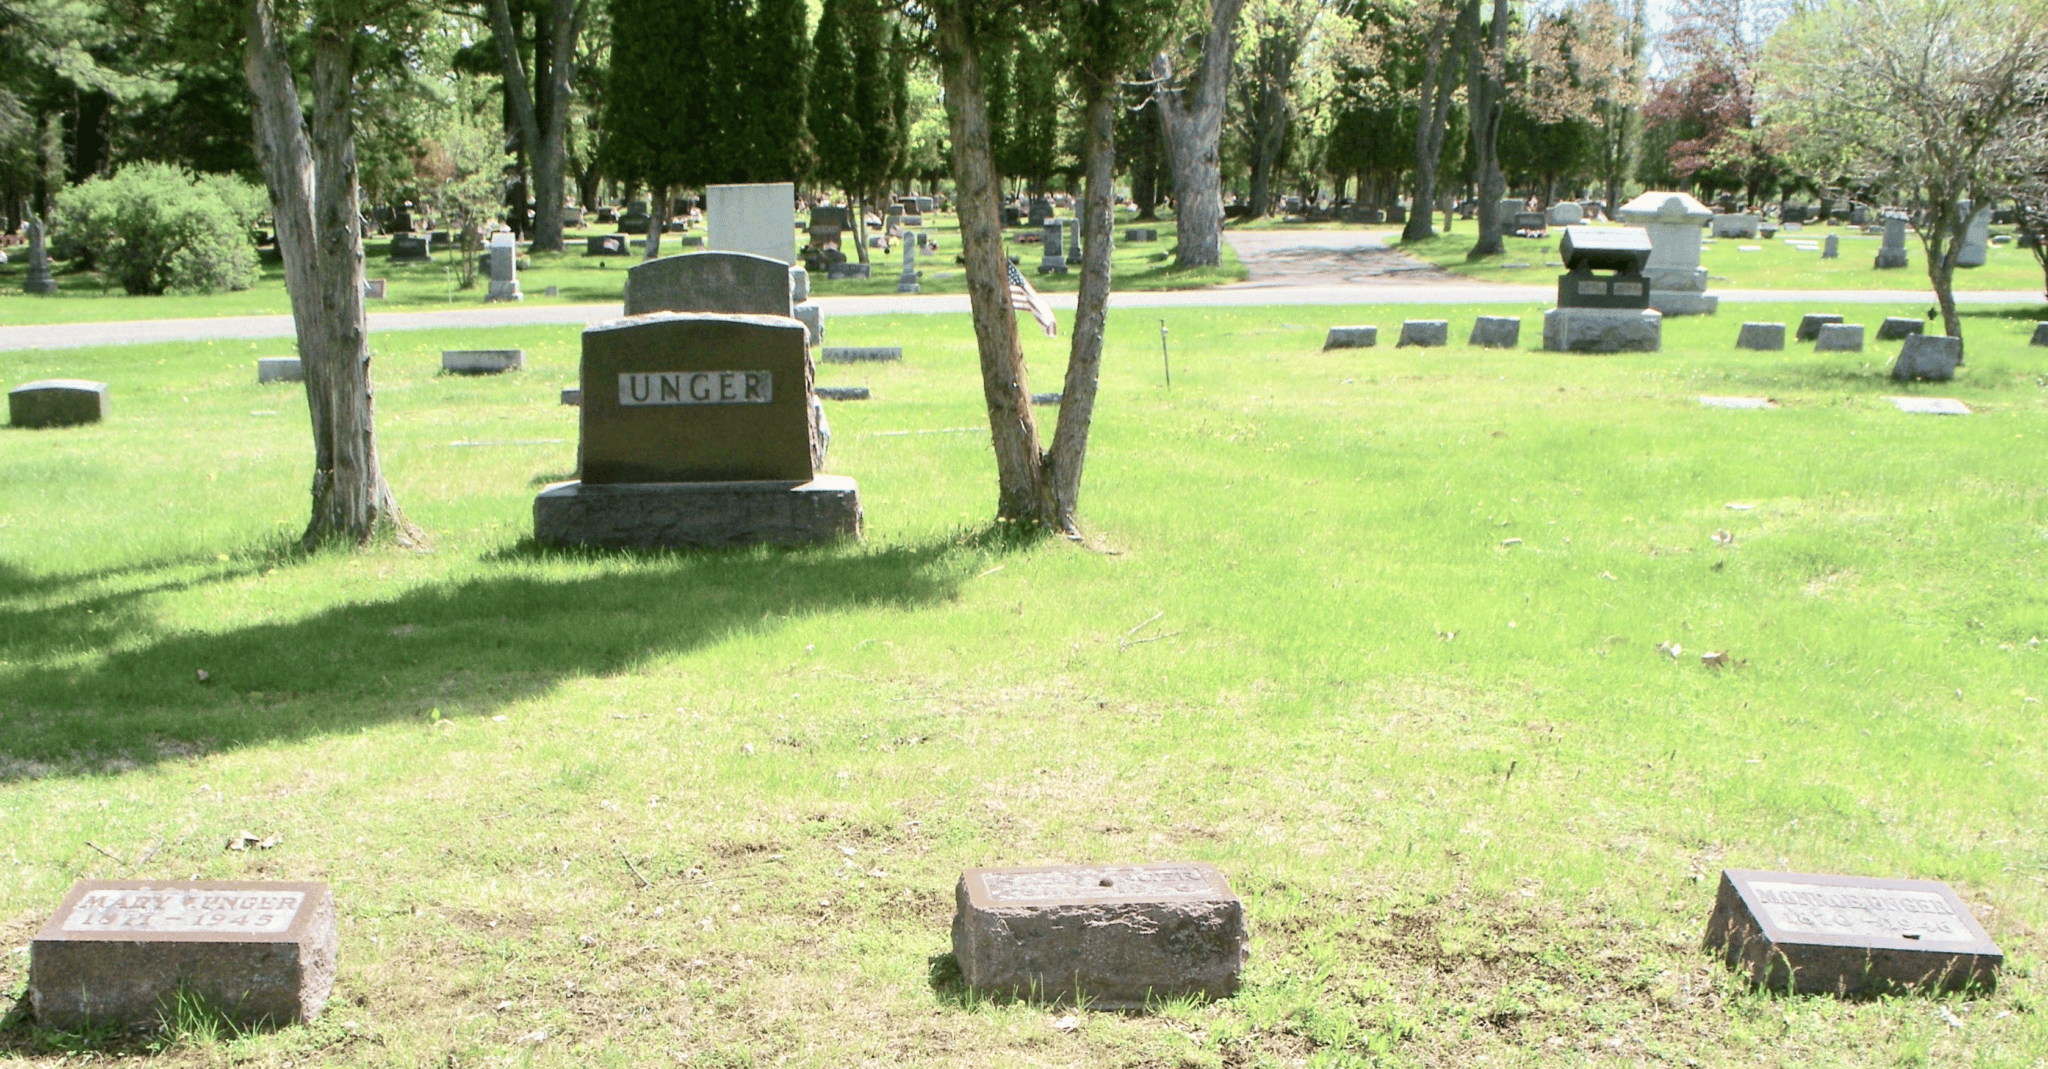 Unger Section of the Iron Mountain Cemetery